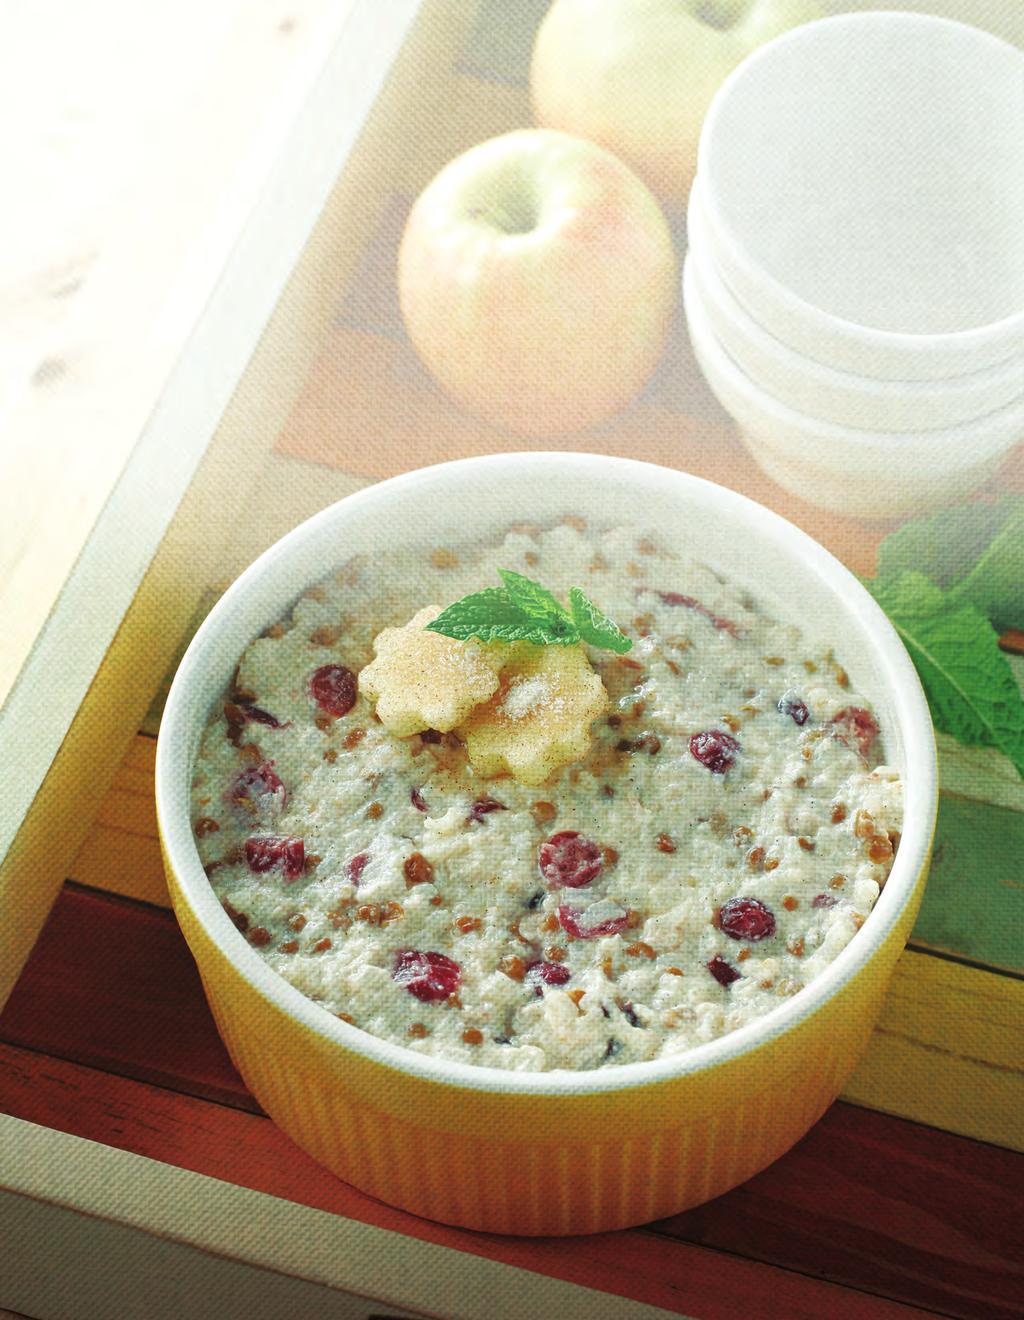 Creamy Lentil Rice Pudding with Fresh Spiced Apple DESSERT SERVINGS 4-6 PREP TIME 10 minutes TOTAL TIME 55 minutes Ingredients 4 cups (1 L) 2% milk ½ cup (125 ml) long grain rice ½ cup (125 ml)